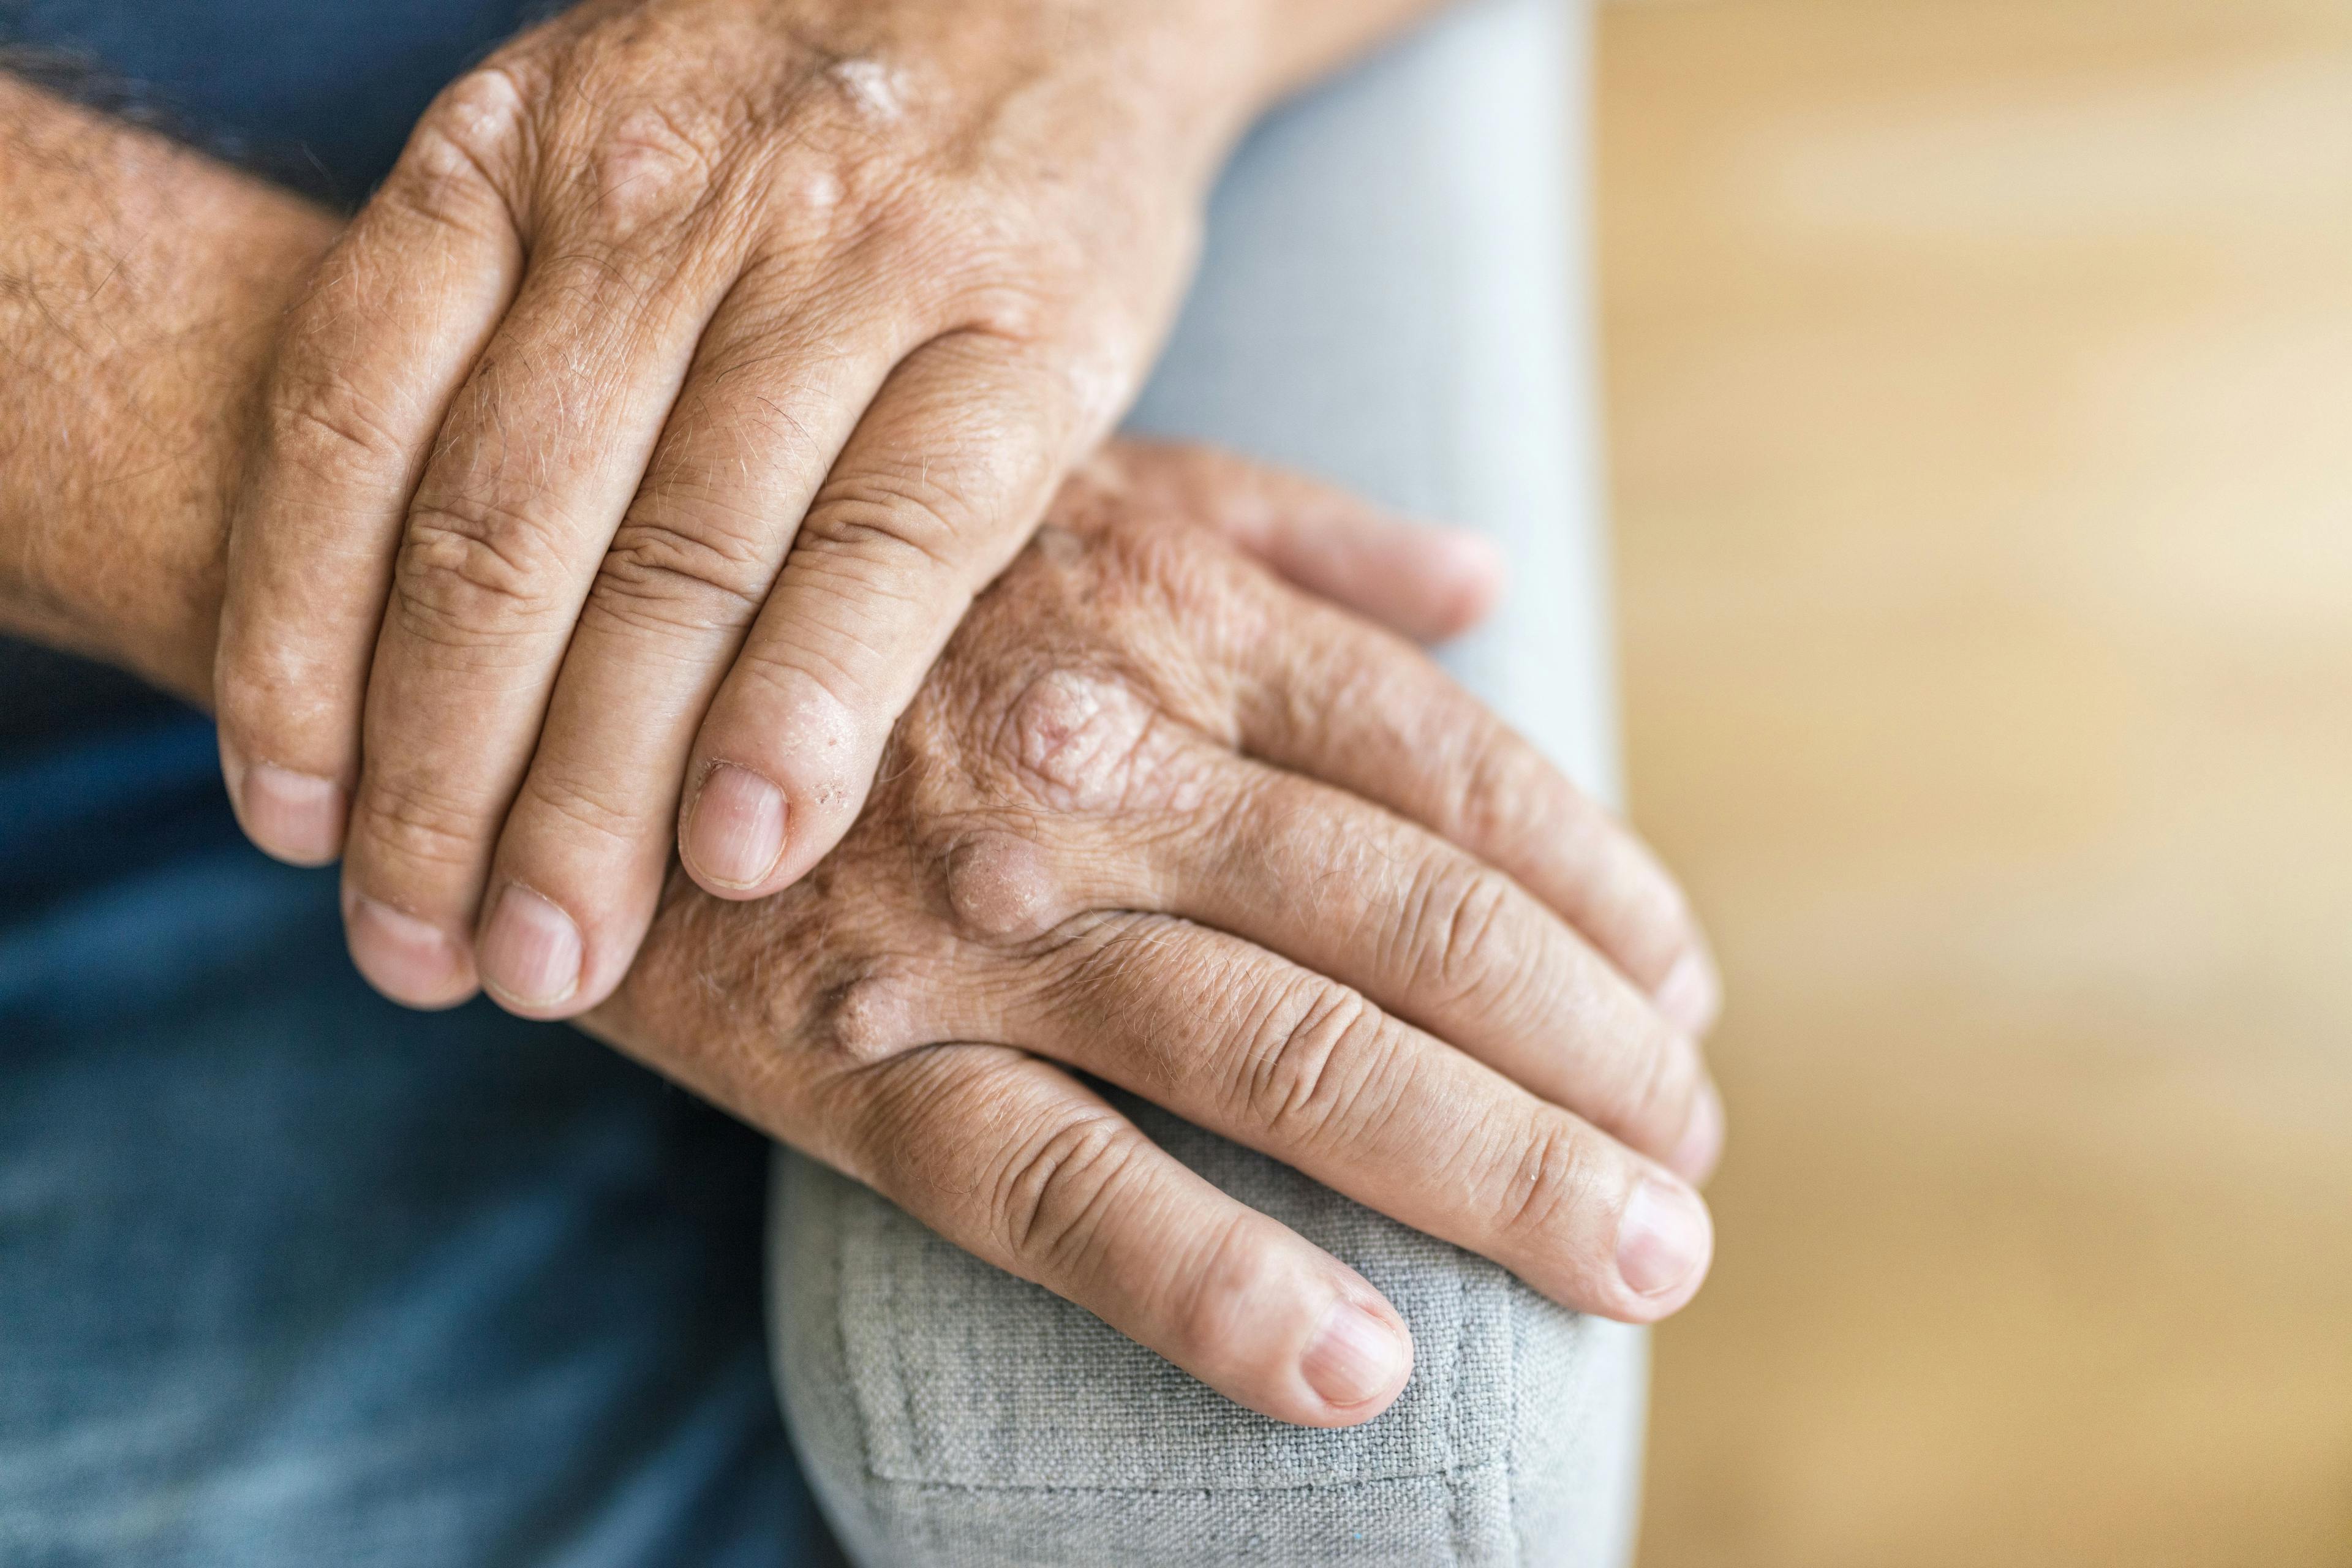 Man with psoriatic arthritis on hands -- Image credit: and.one | stock.adobe.com